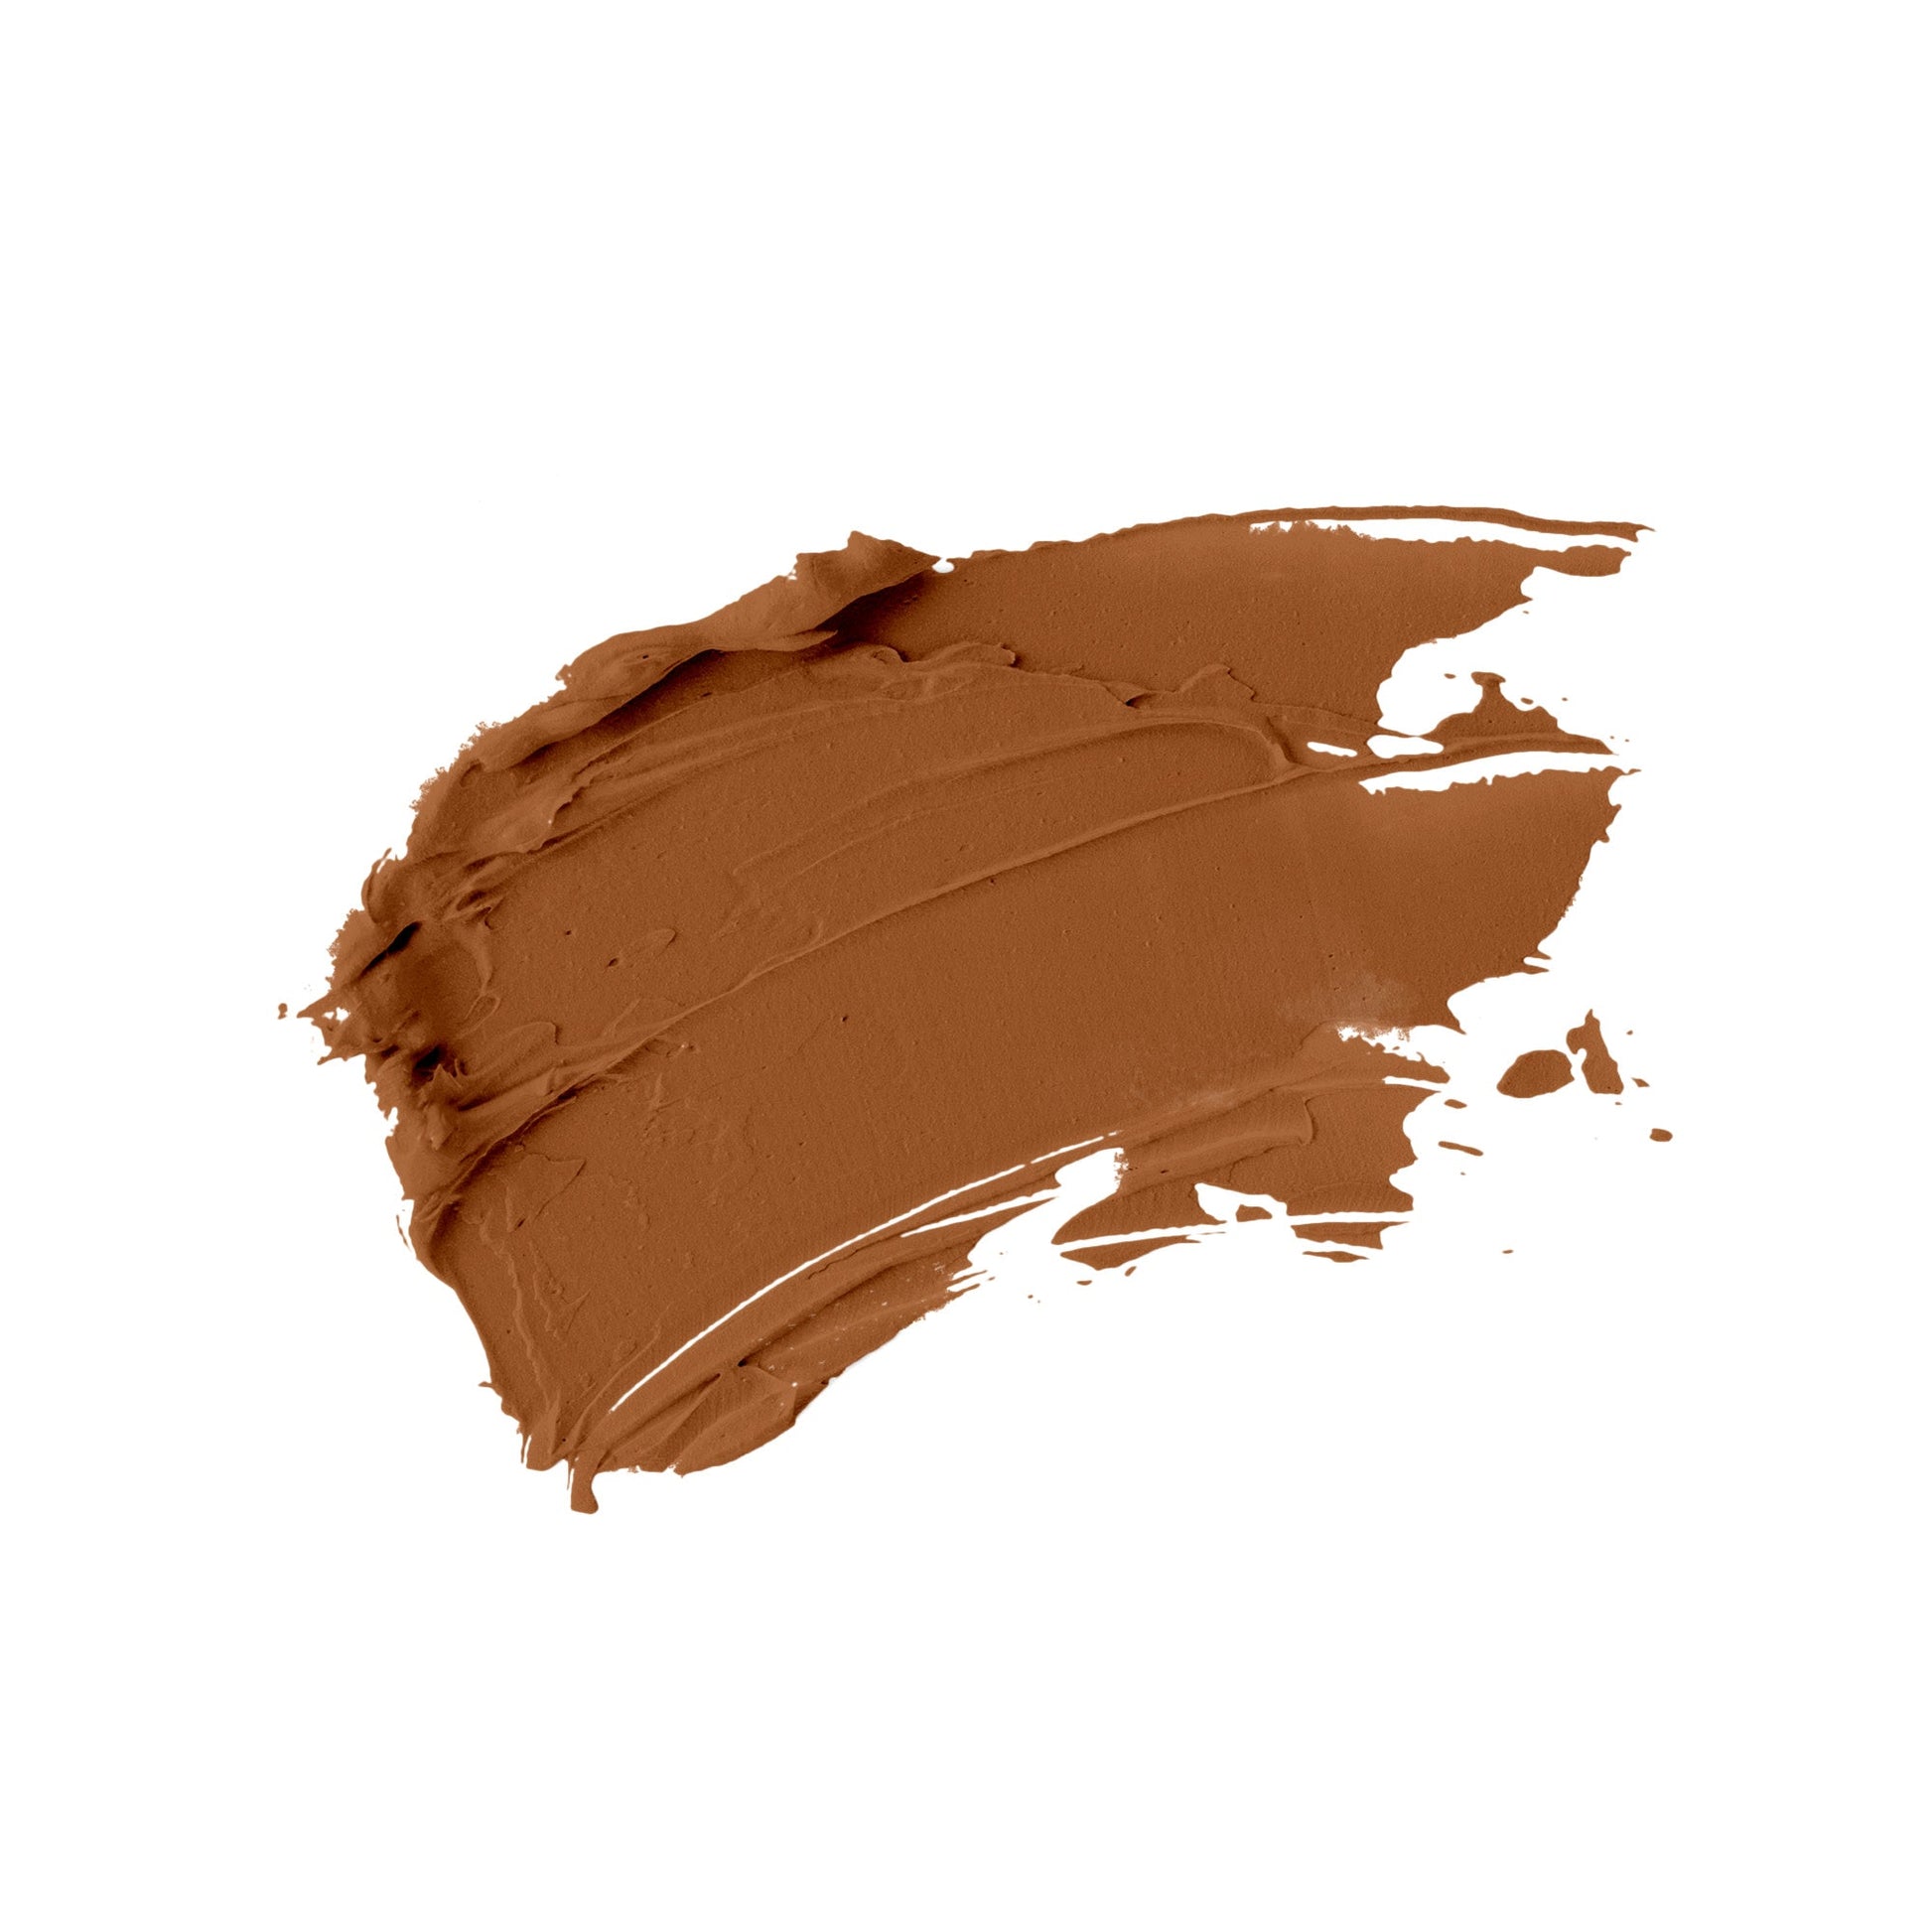 Swatch of ebony tone of an oil free natural non-toxic liquid foundation